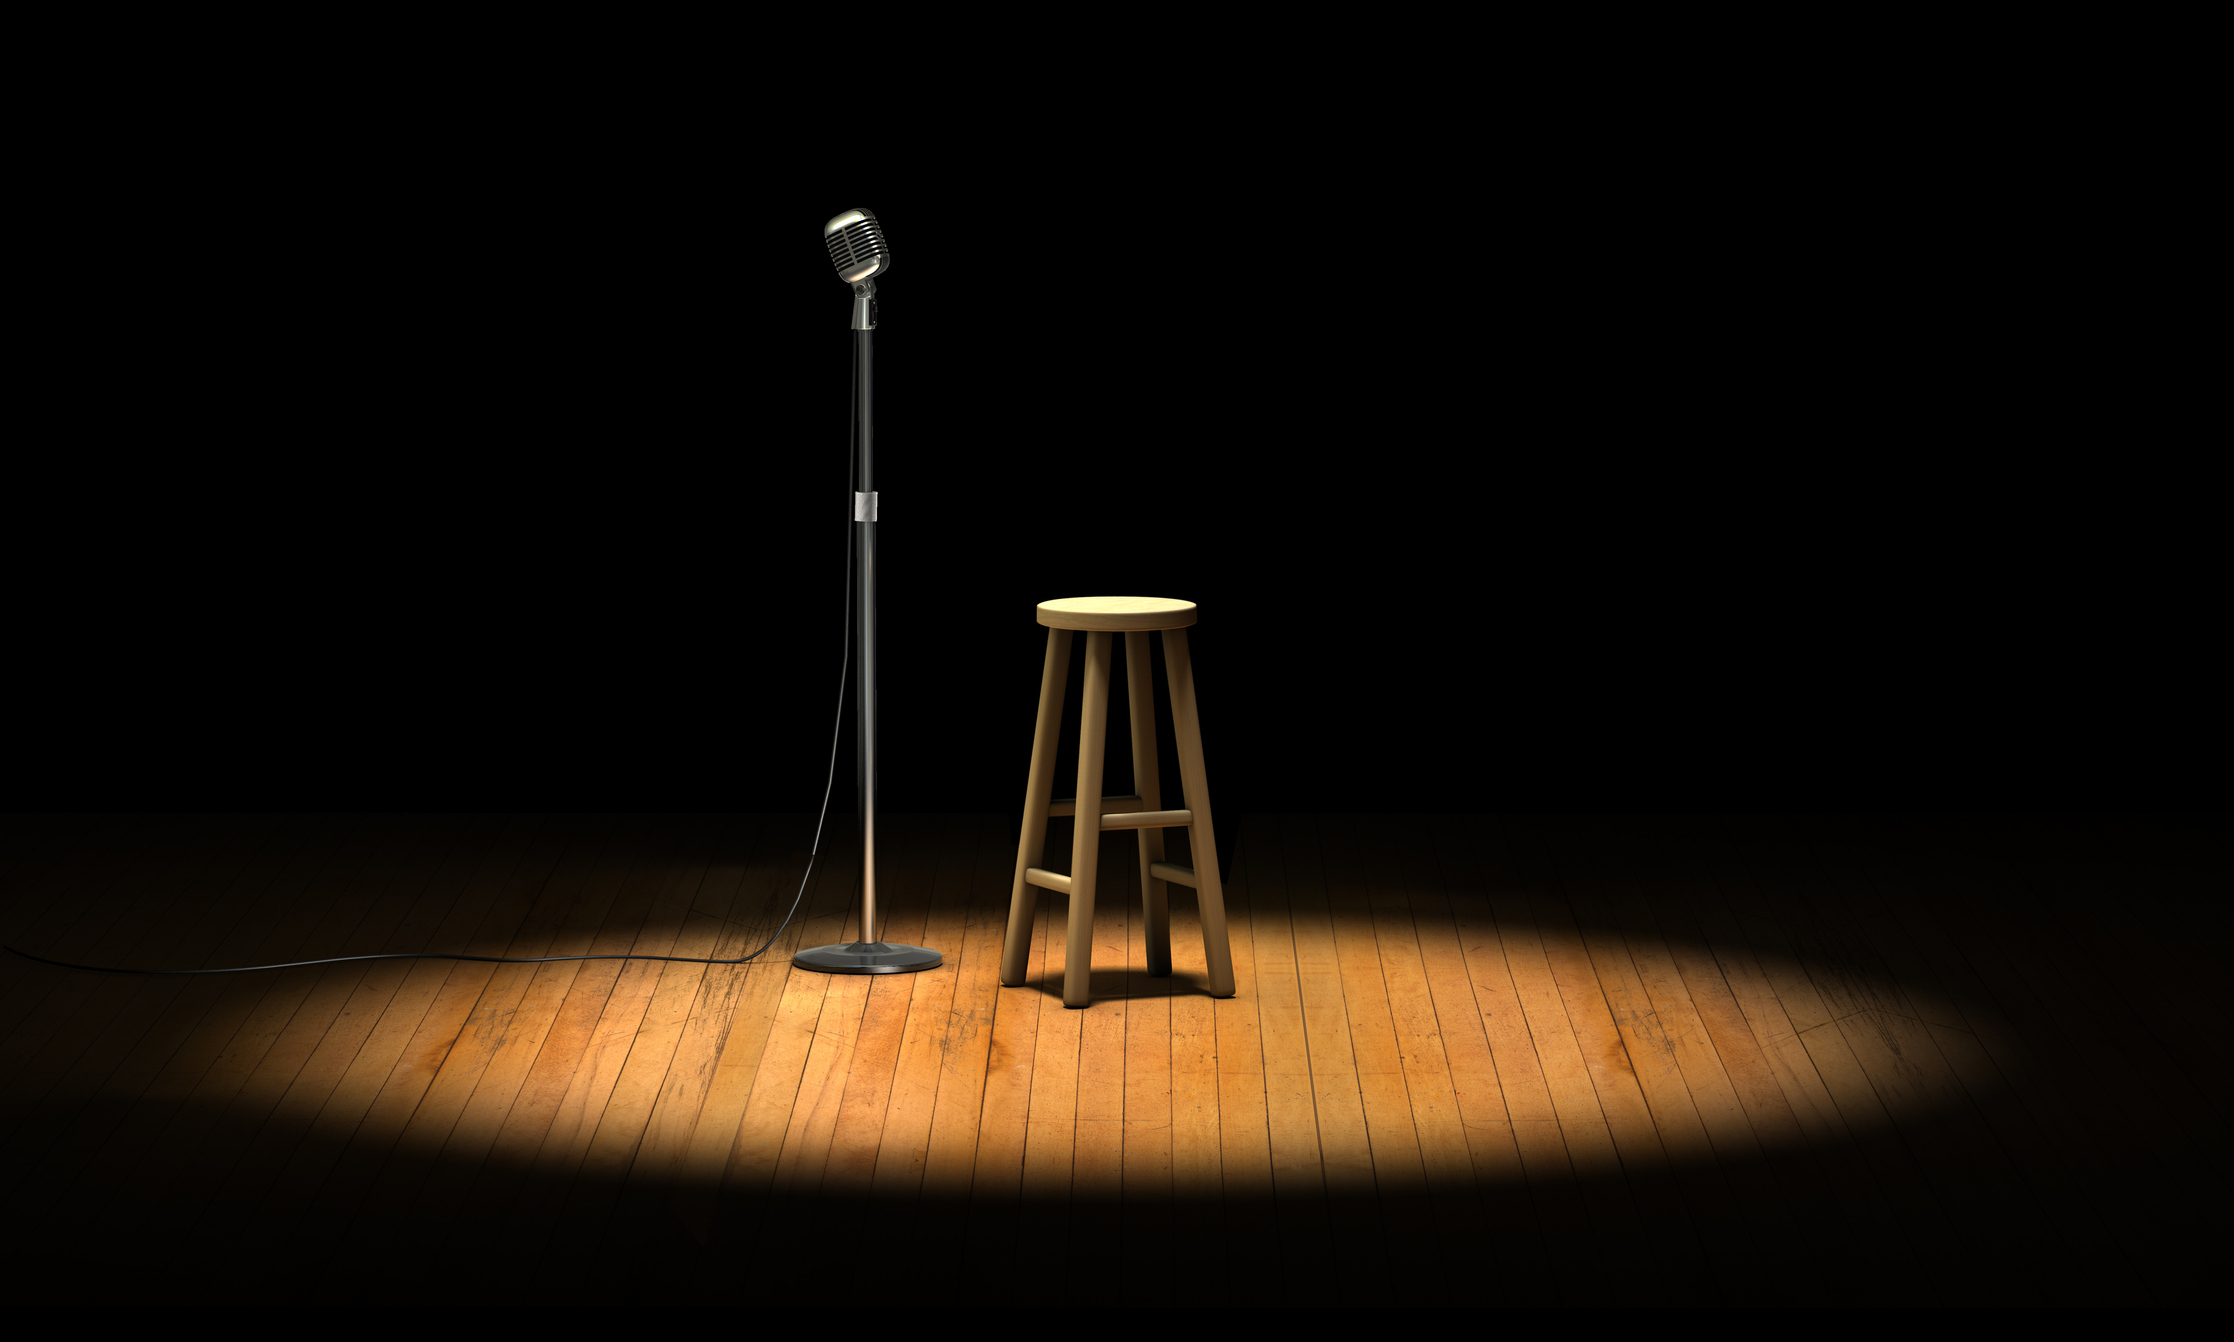 A bench and a microphone on stage